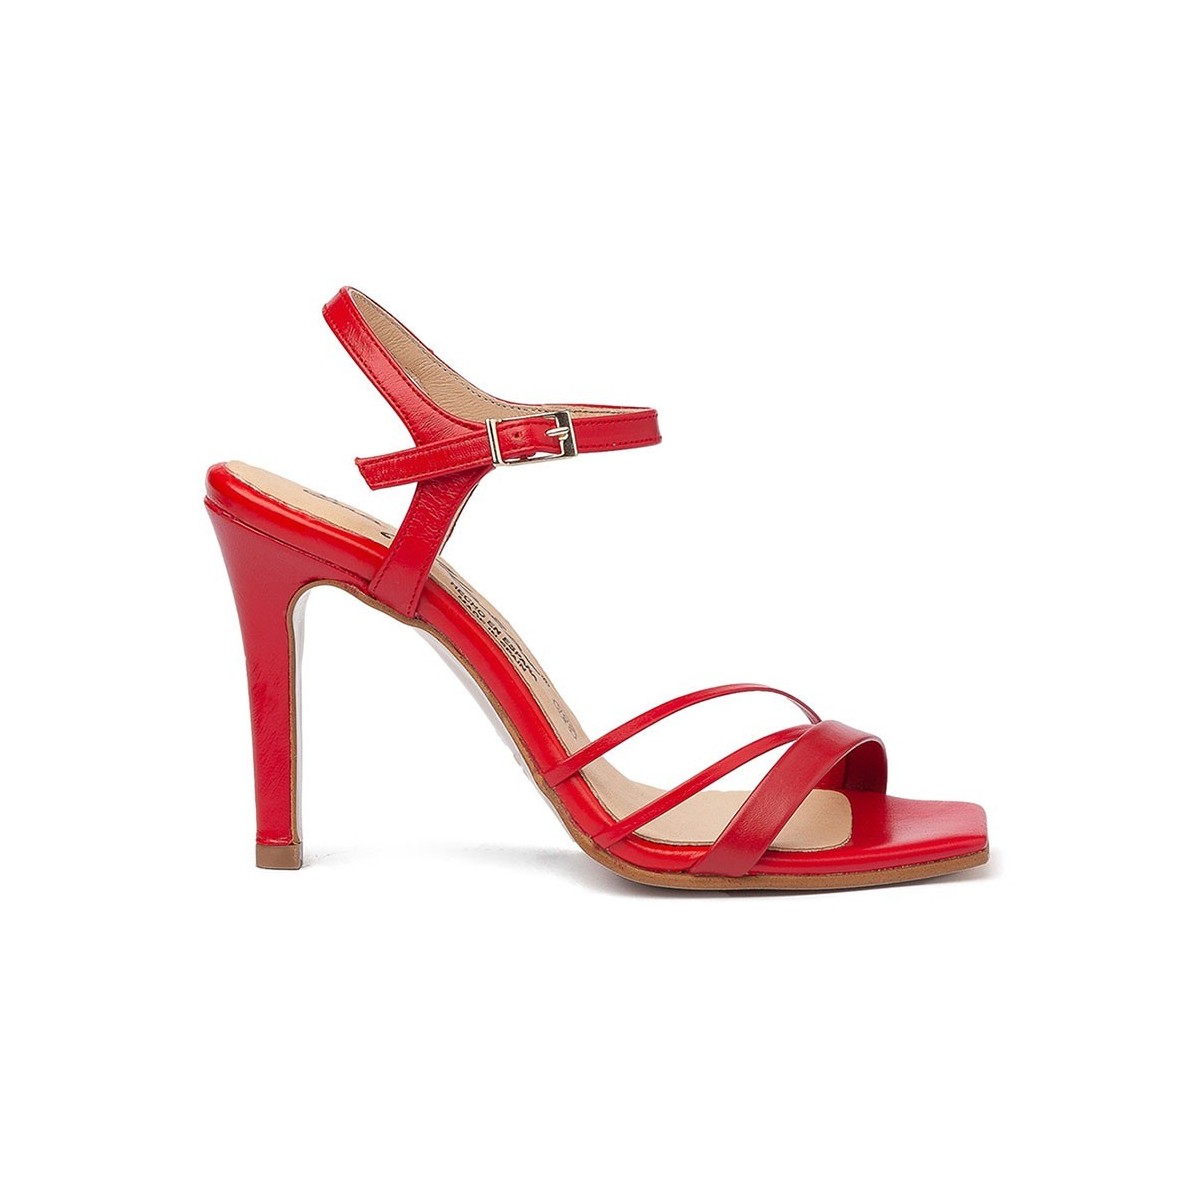 Red leather sandals with high heel by CBP
High heeled leather sandals by CBP 